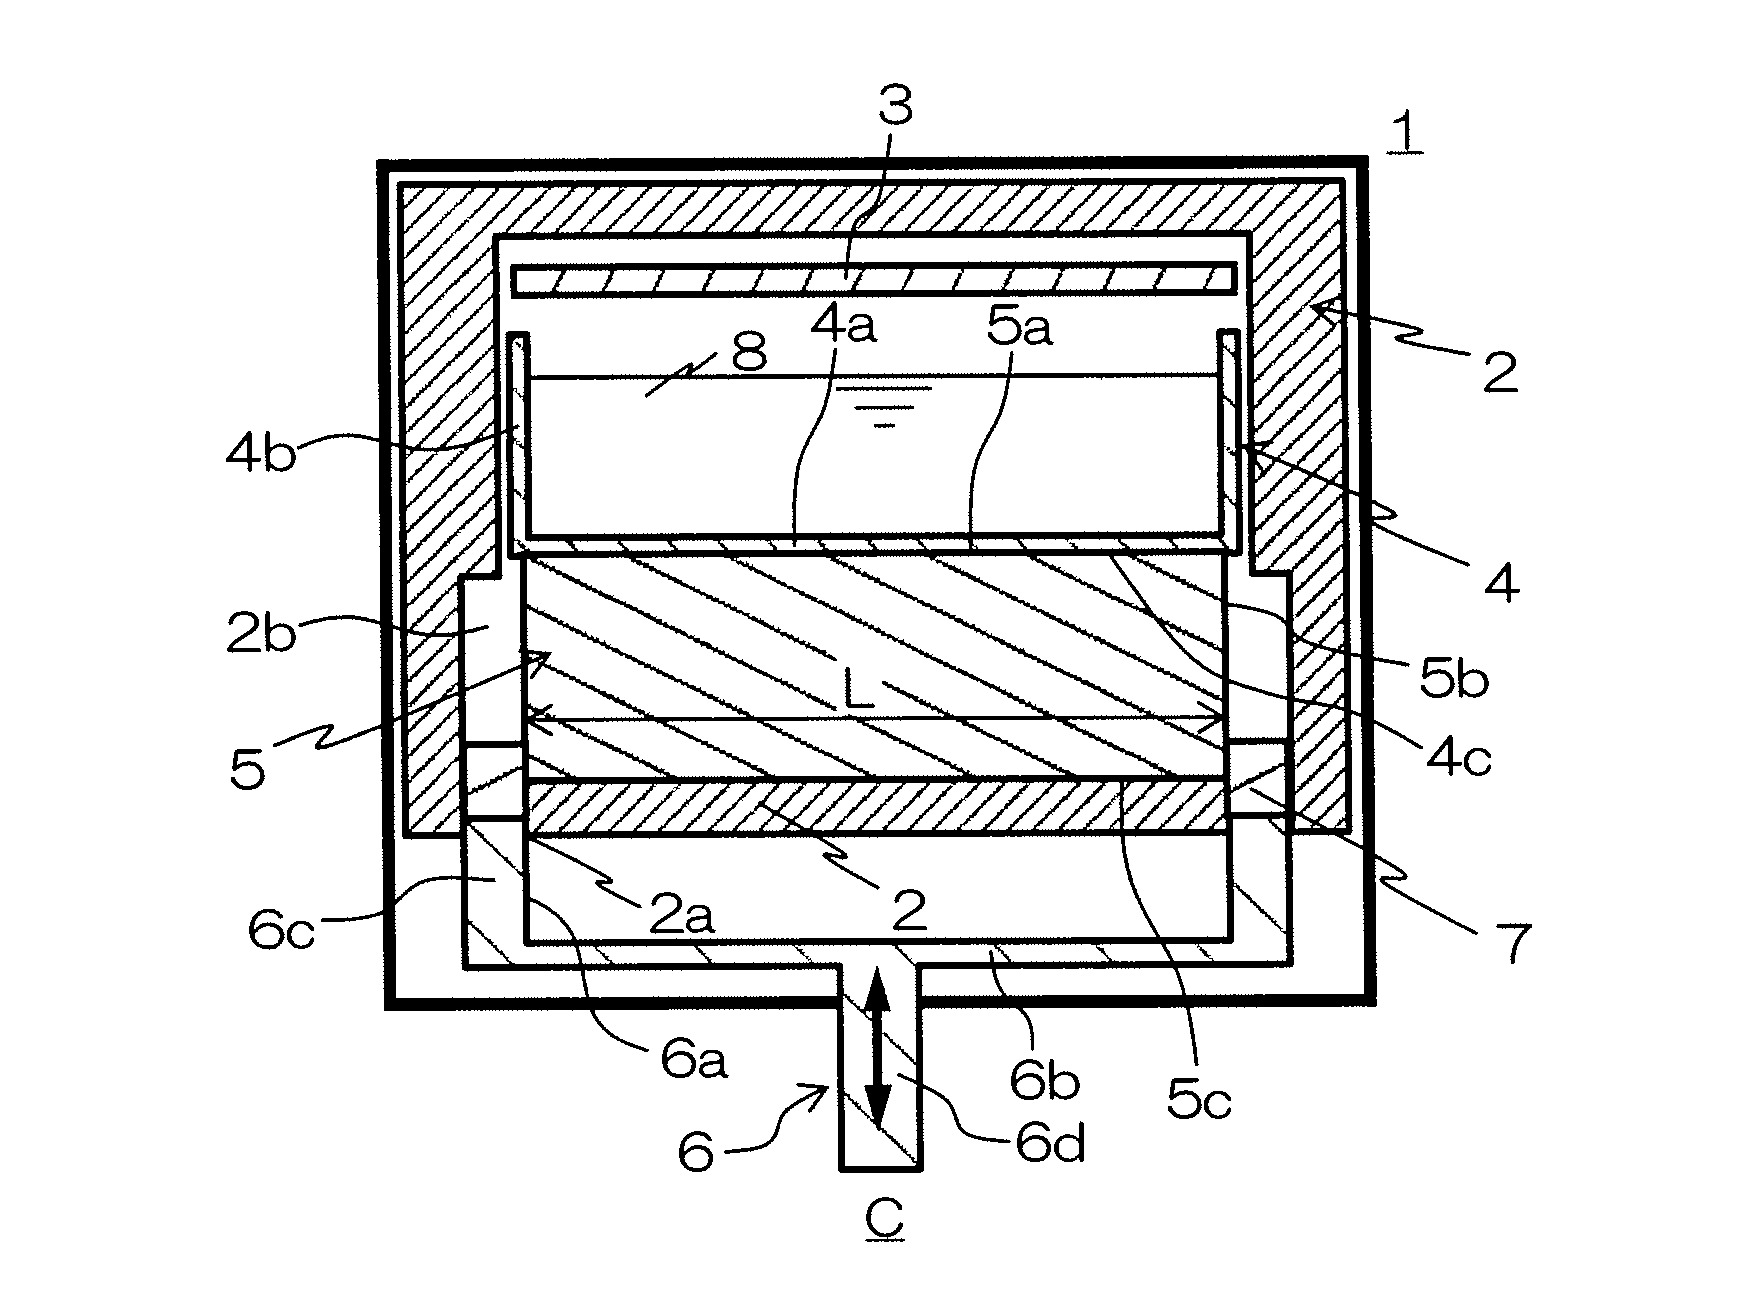 Silicon casting apparatus and method of producing silicon ingot